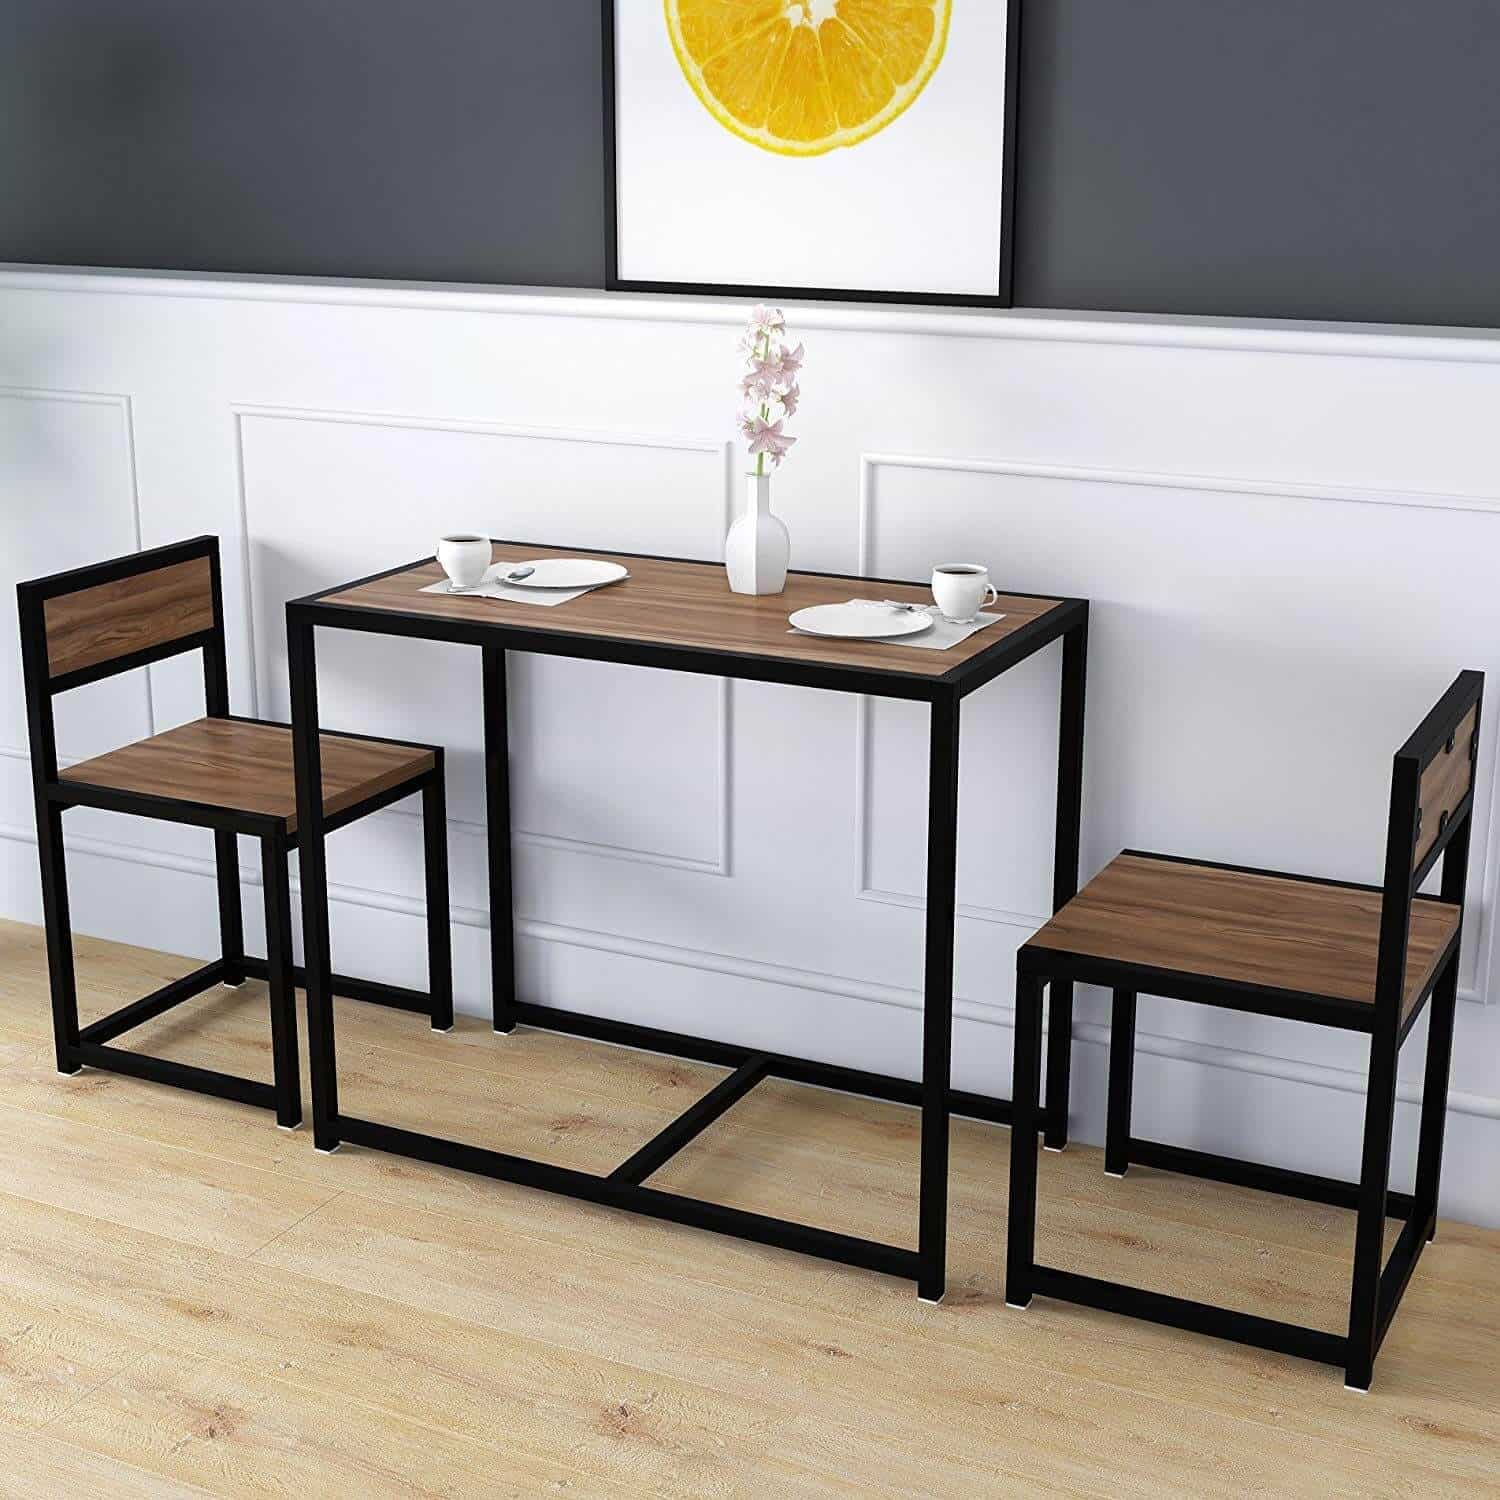 Small dining table for kitchen 17